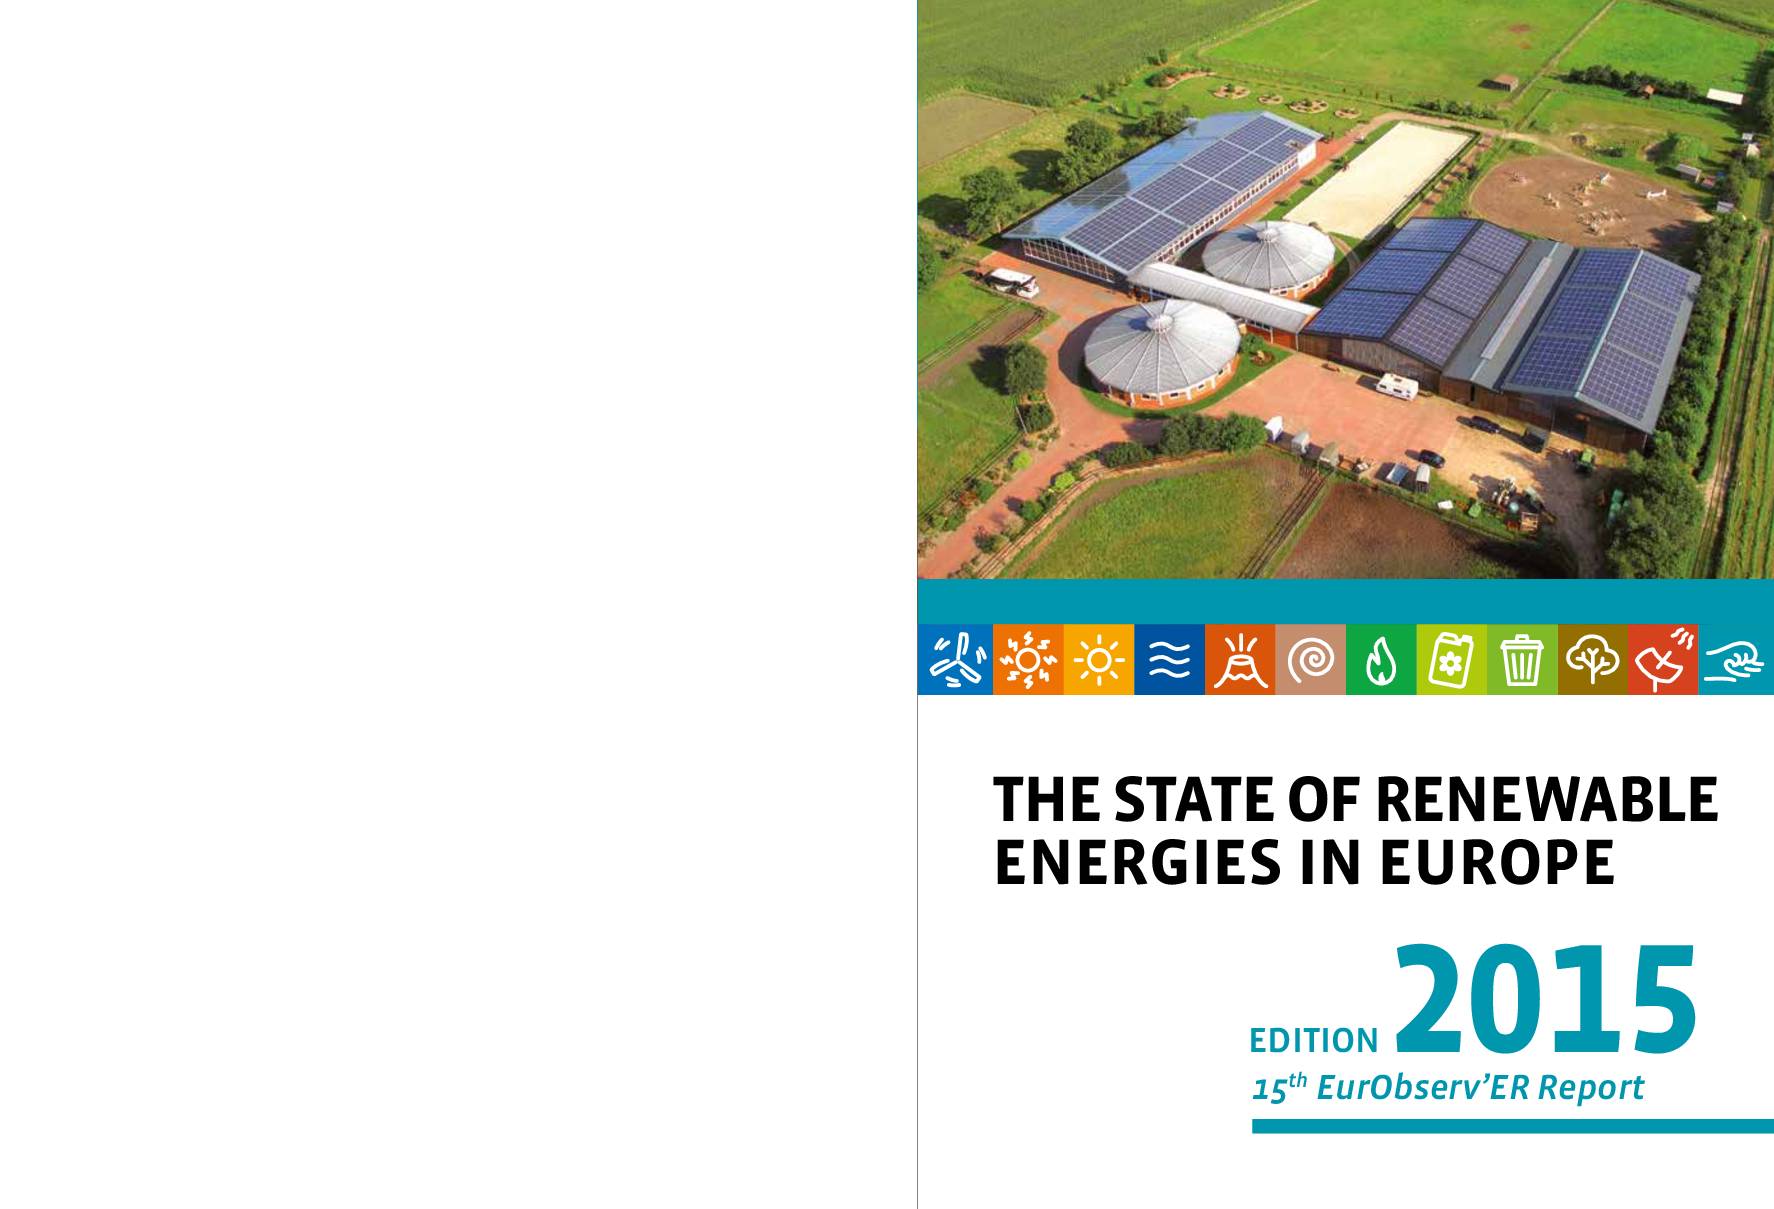 The State of Renewables in Europe 2015